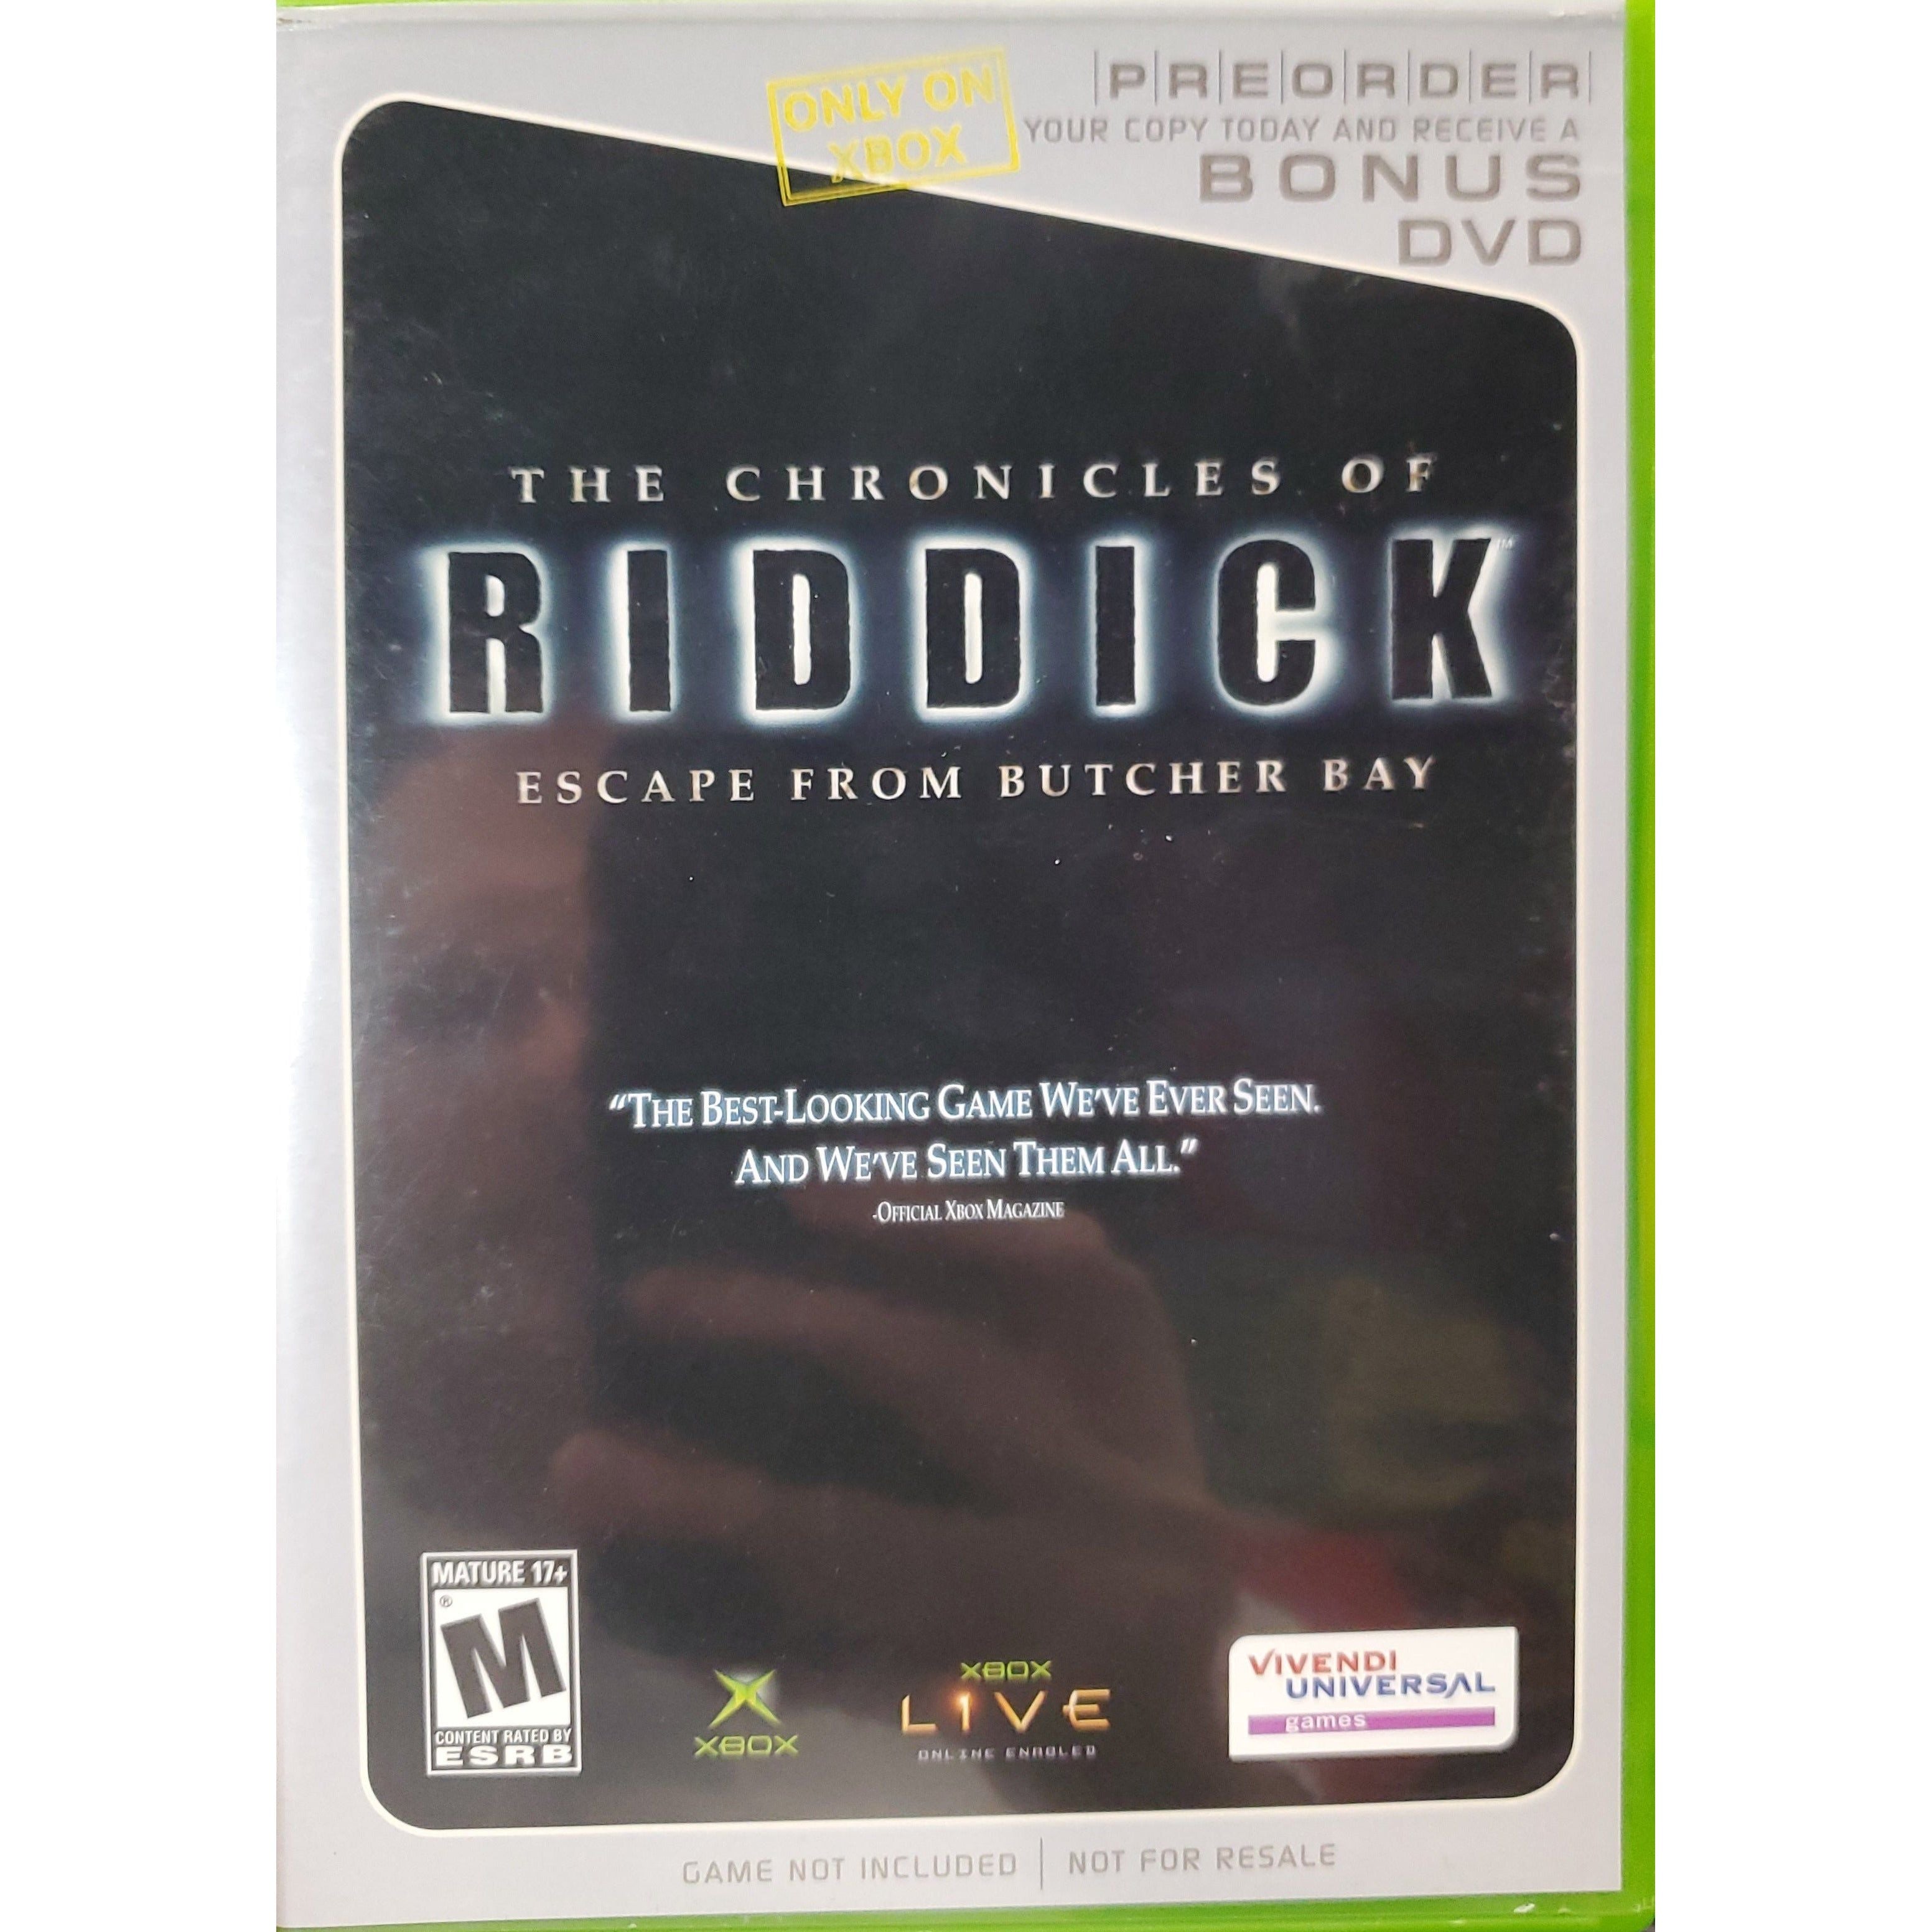 The Chronicles of Riddick Escape from Butcher Bay Bonus Preorder DVD